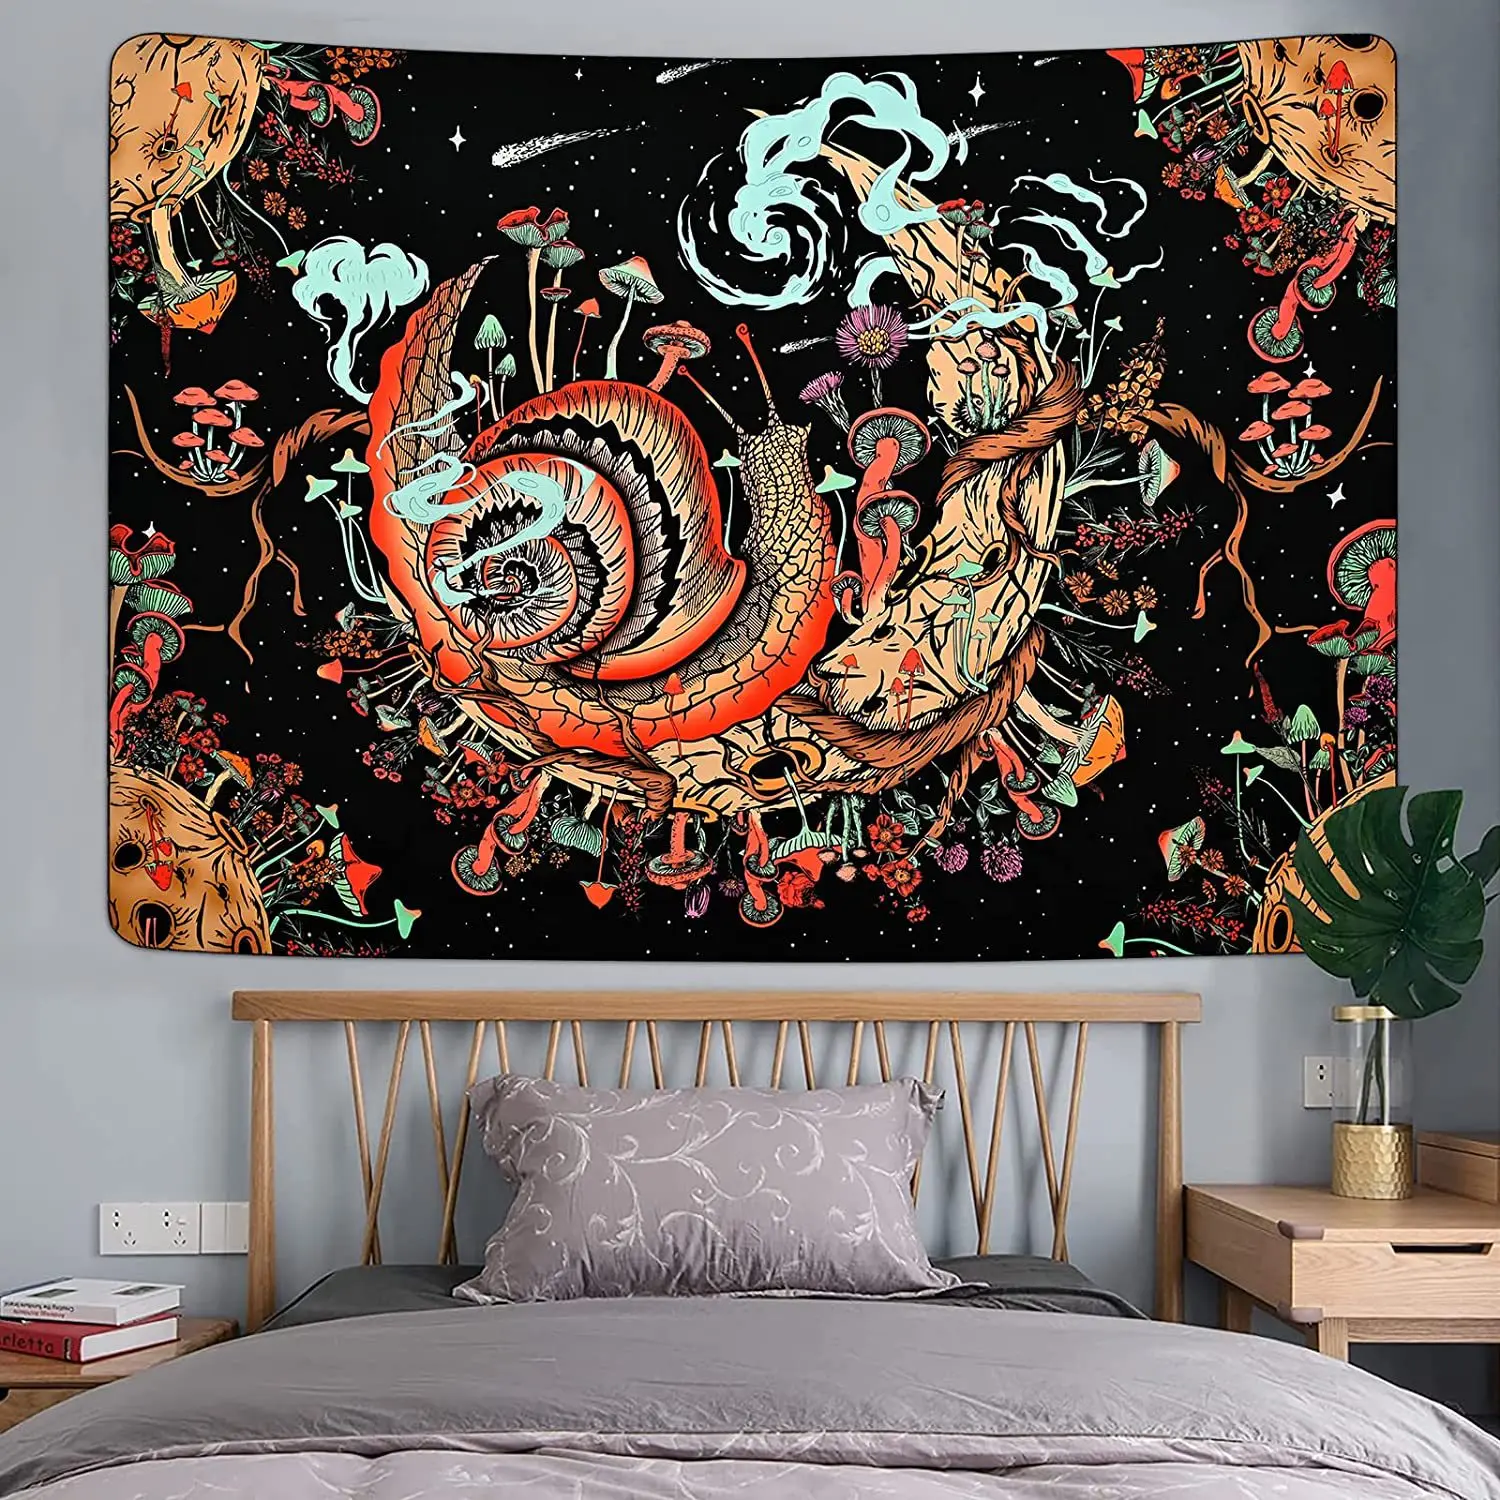 

Psychedelic Mushroom Tapestry Hippie Monster Bedroom Decoration Wall Hanging Aesthetic Art Home Room Art Decor Tapiz Pared Mural